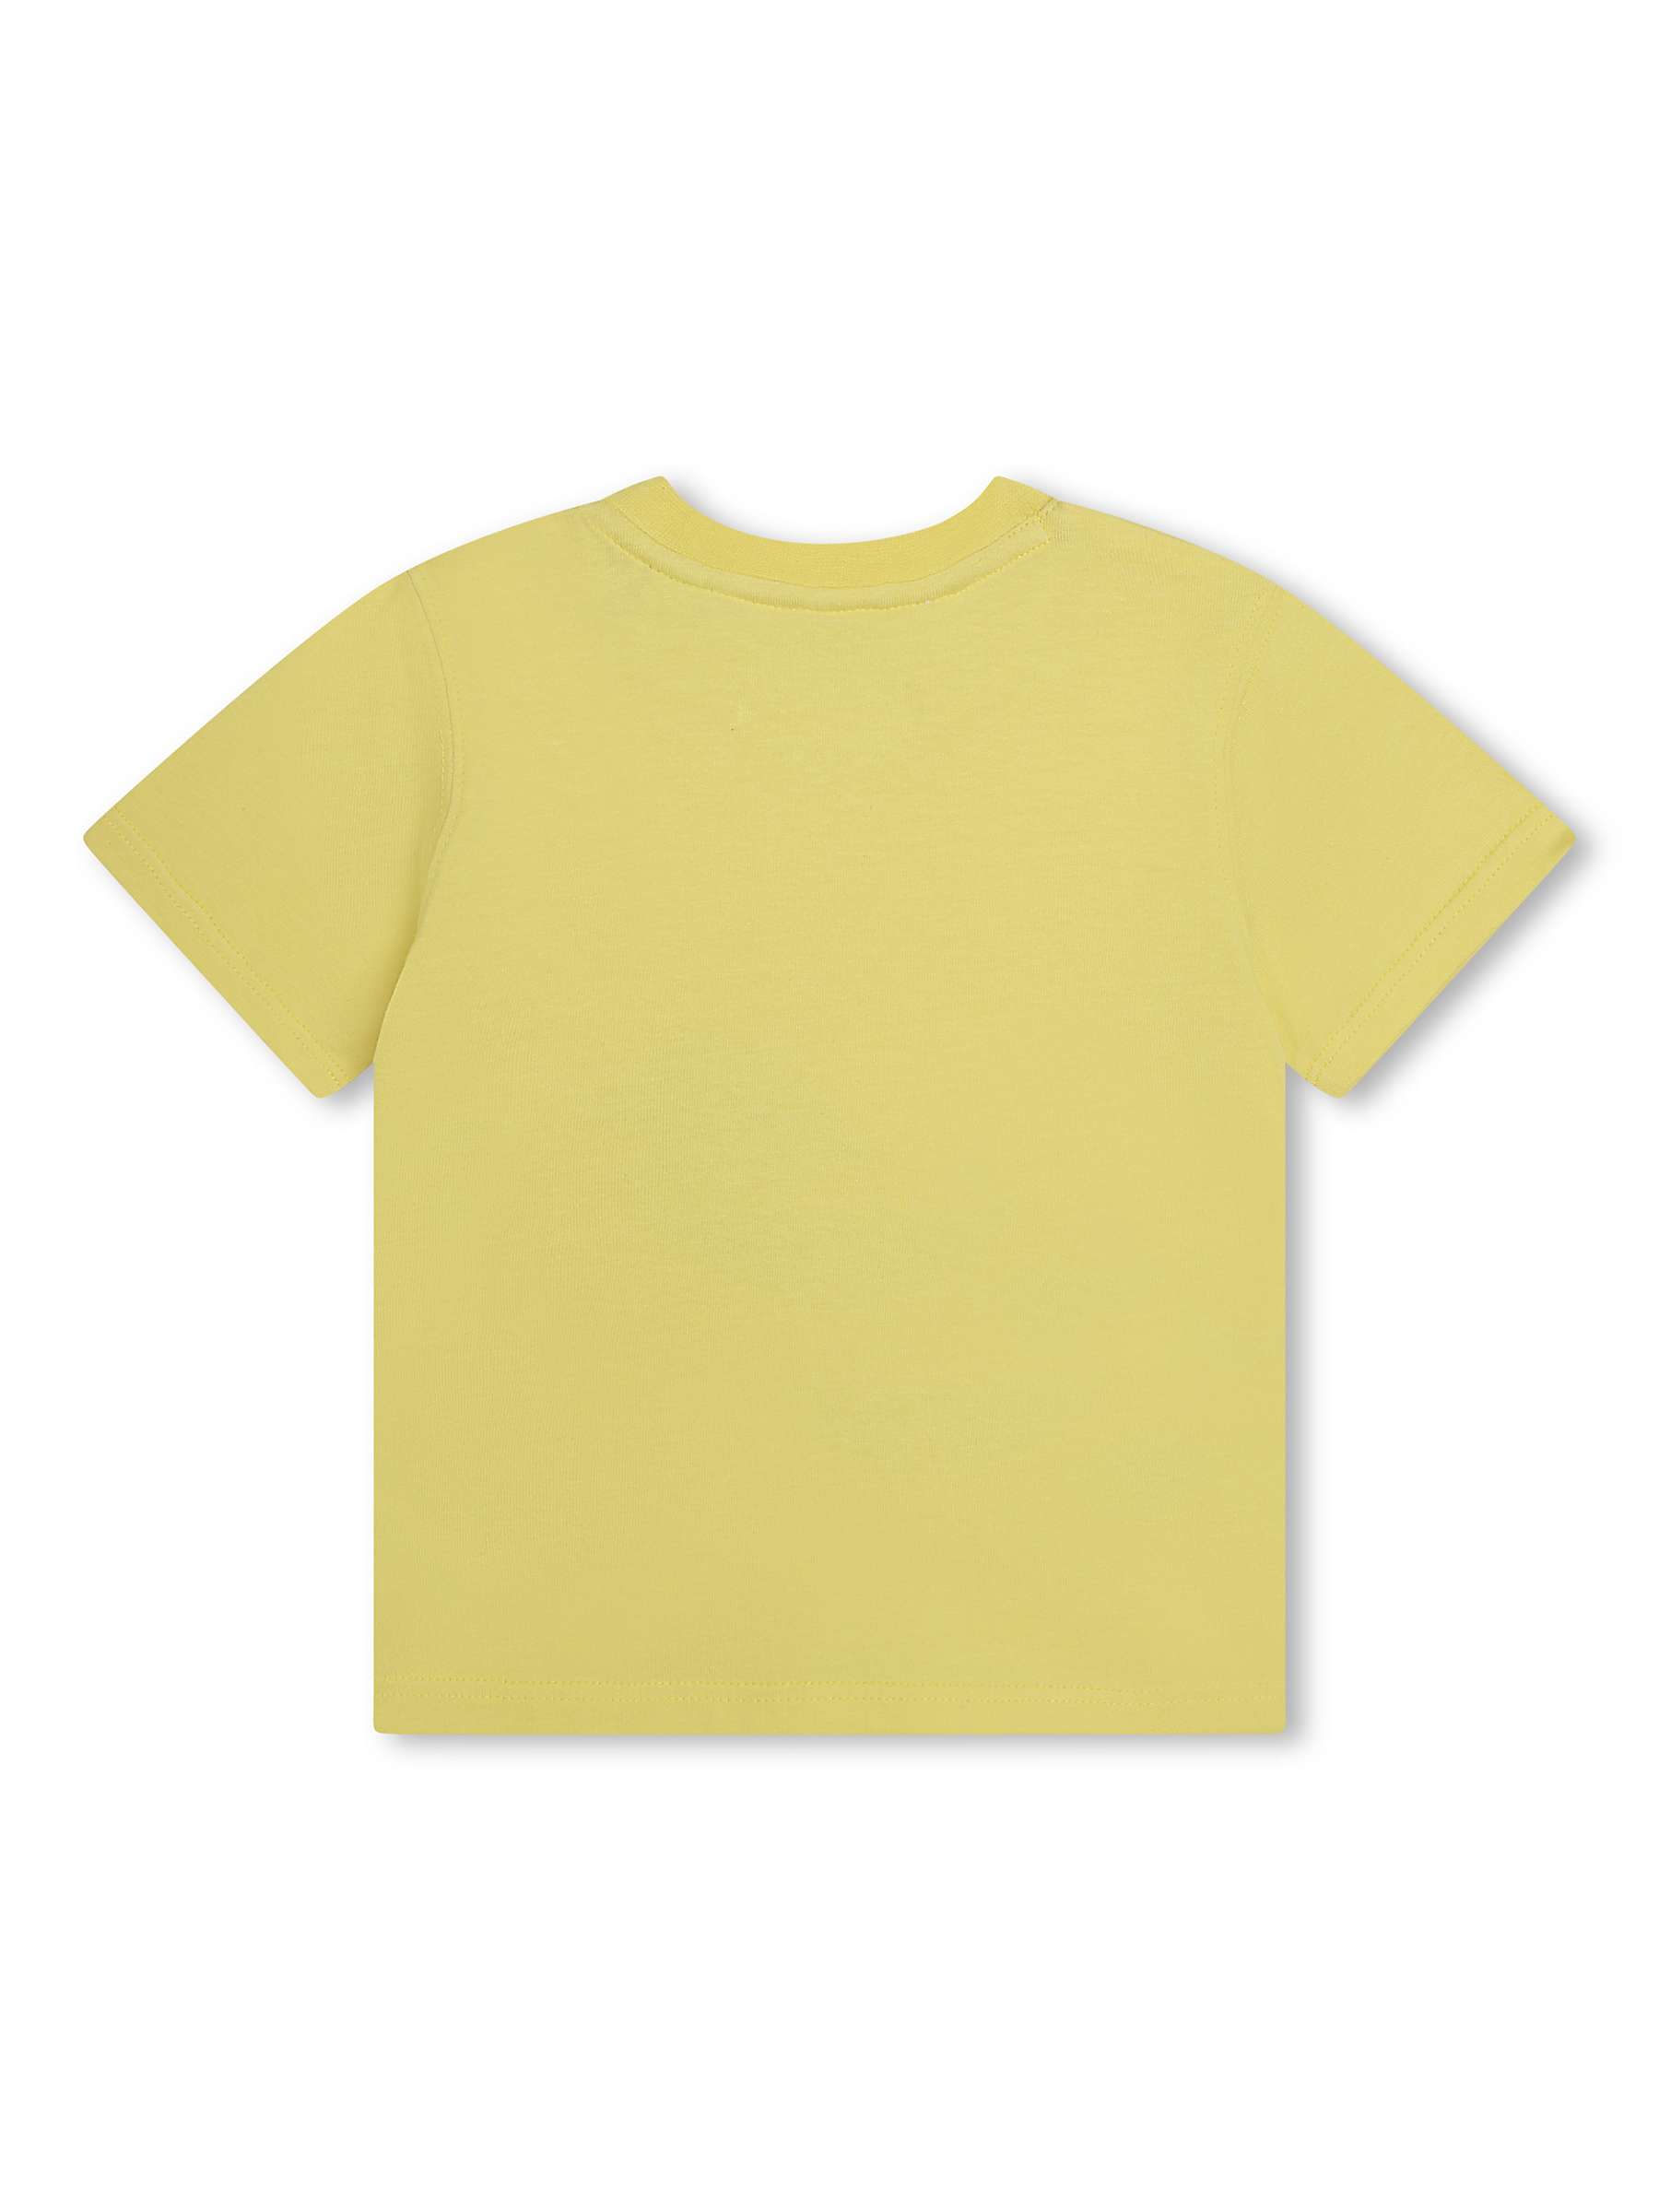 Buy Timberland Baby Let's Have Fun Logo T-Shirt, Yellow Online at johnlewis.com